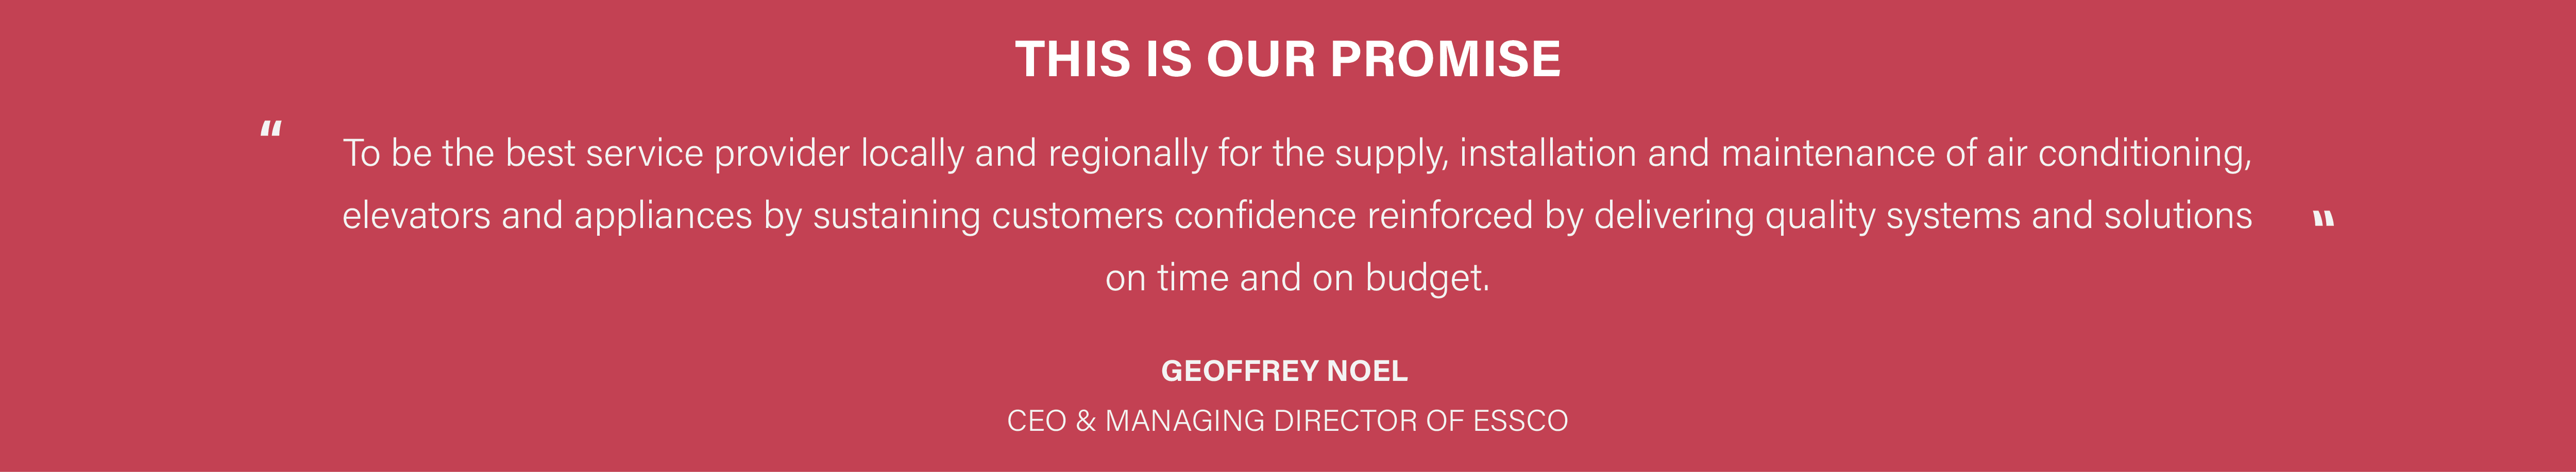 ESSCO's Promise to be the best service provider locally and regionally